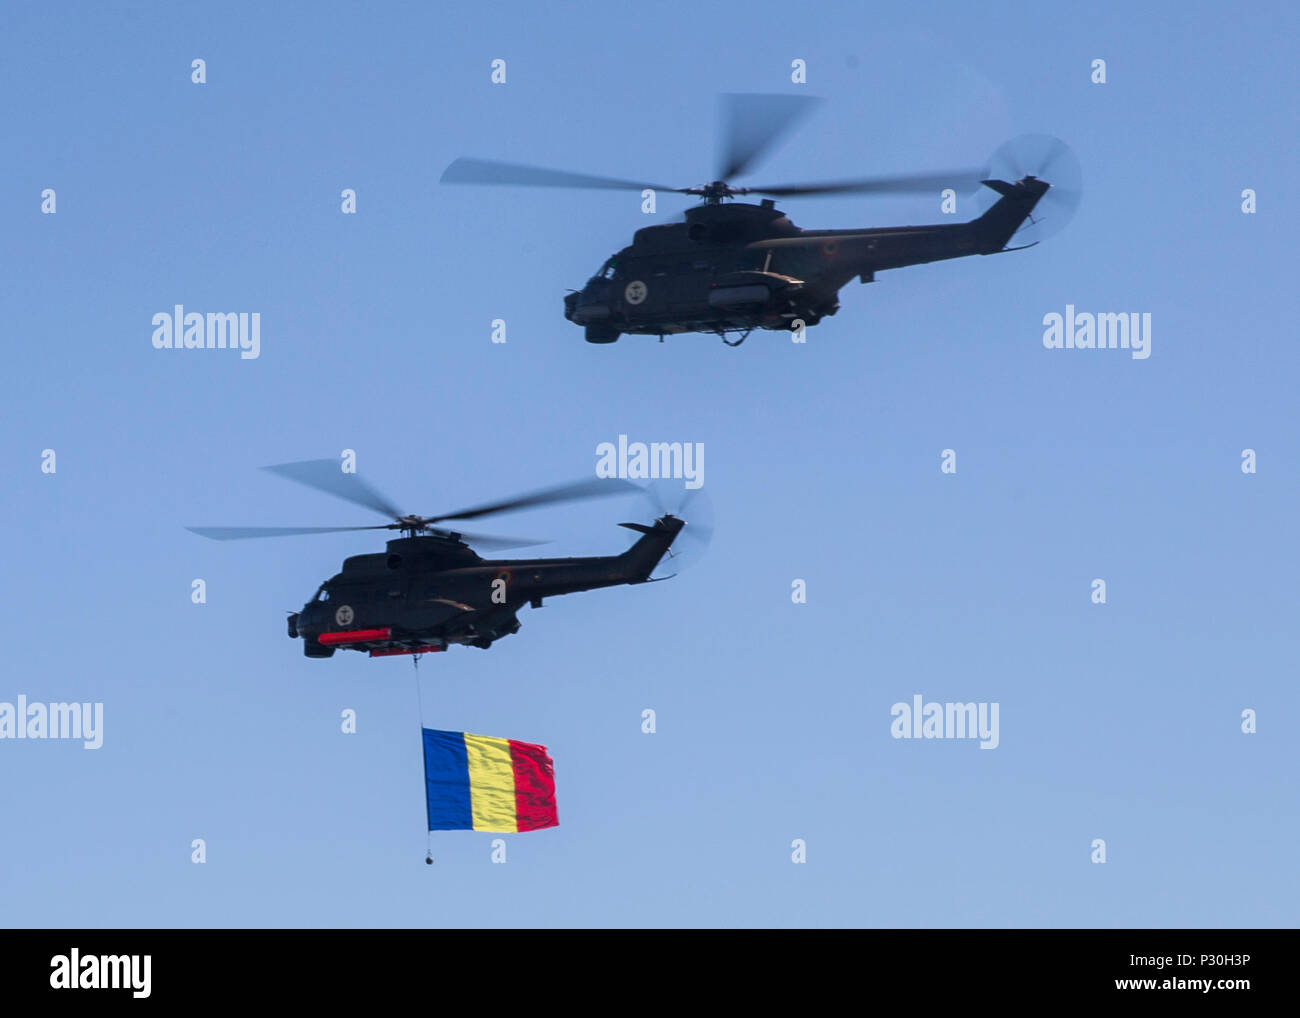 Two Romanian helicopters fly over a delighted crowd of spectators while carrying the Romanian flag during the 114th annual Navy Day celebration at the Port of Constanţa, Romania, Aug. 15, 2016. U.S. Sailors and Marines supporting the Black Sea Rotational Force 16.2 helped pay tribute to the prestigious history of the Romanian navy and highlighted the military’s movement toward new developments and modernizations. Black Sea Rotational Force is an annual multilateral security cooperation activity between the U.S. Marine Corps and partner nations in the Black Sea, Balkan and Caucasus regions desi Stock Photo